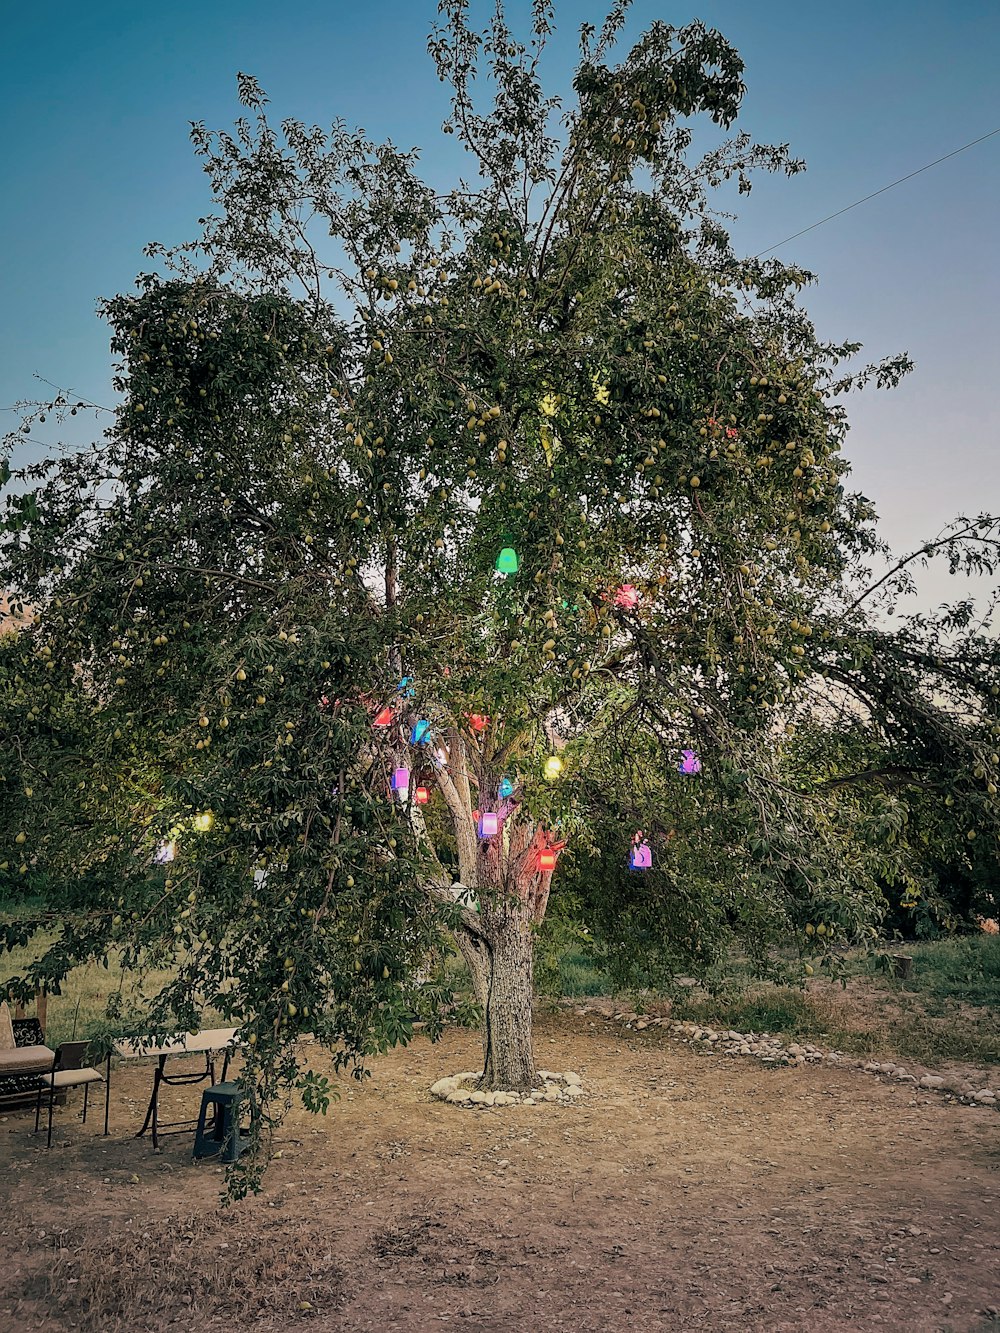 a tree with many colorful ornaments